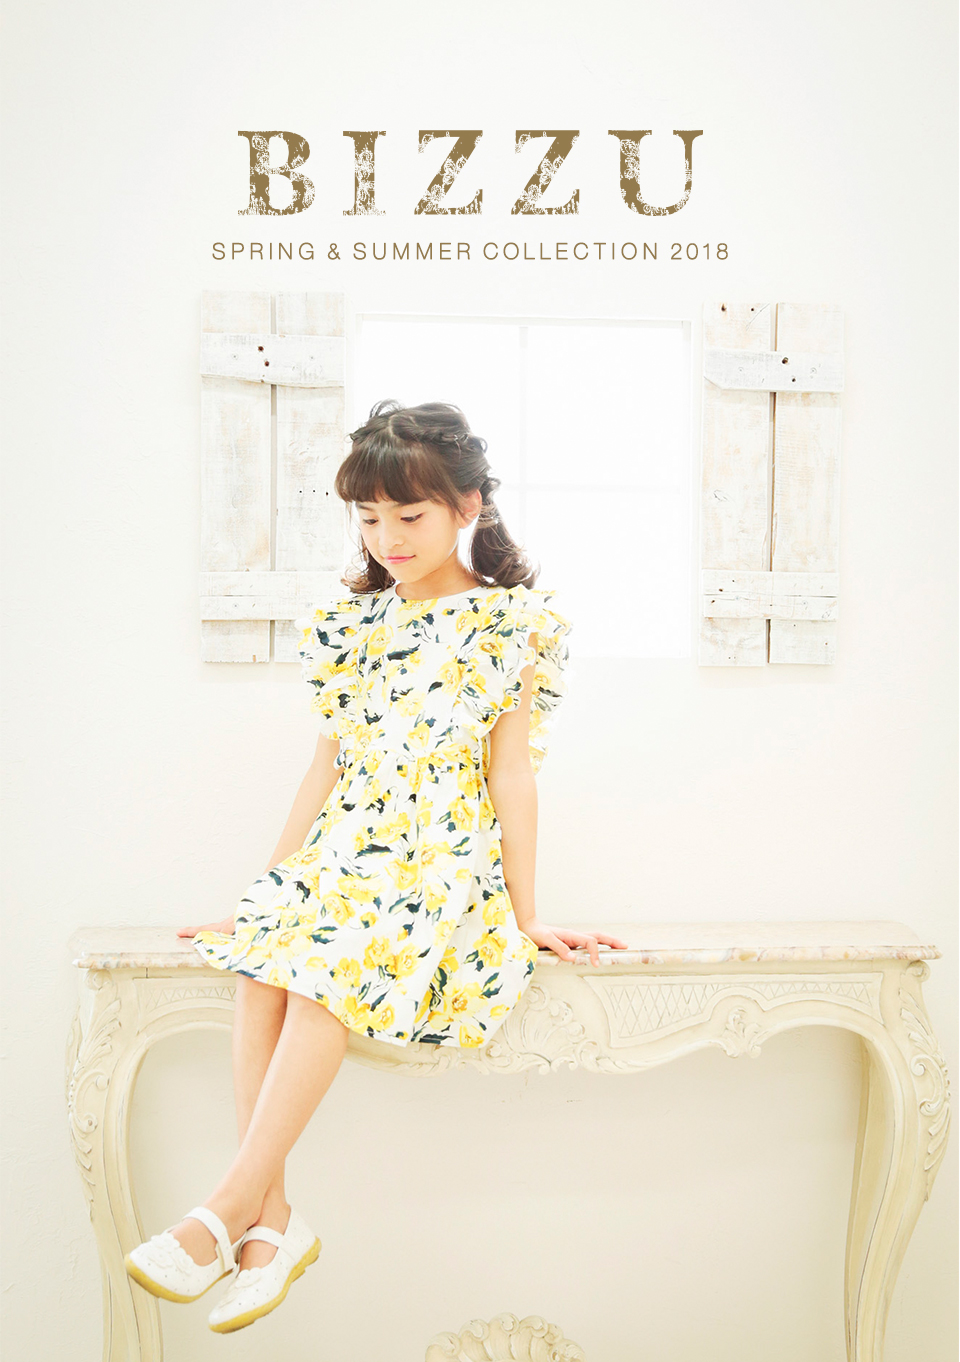 SPRING & SUMMER COLLECTION 2018